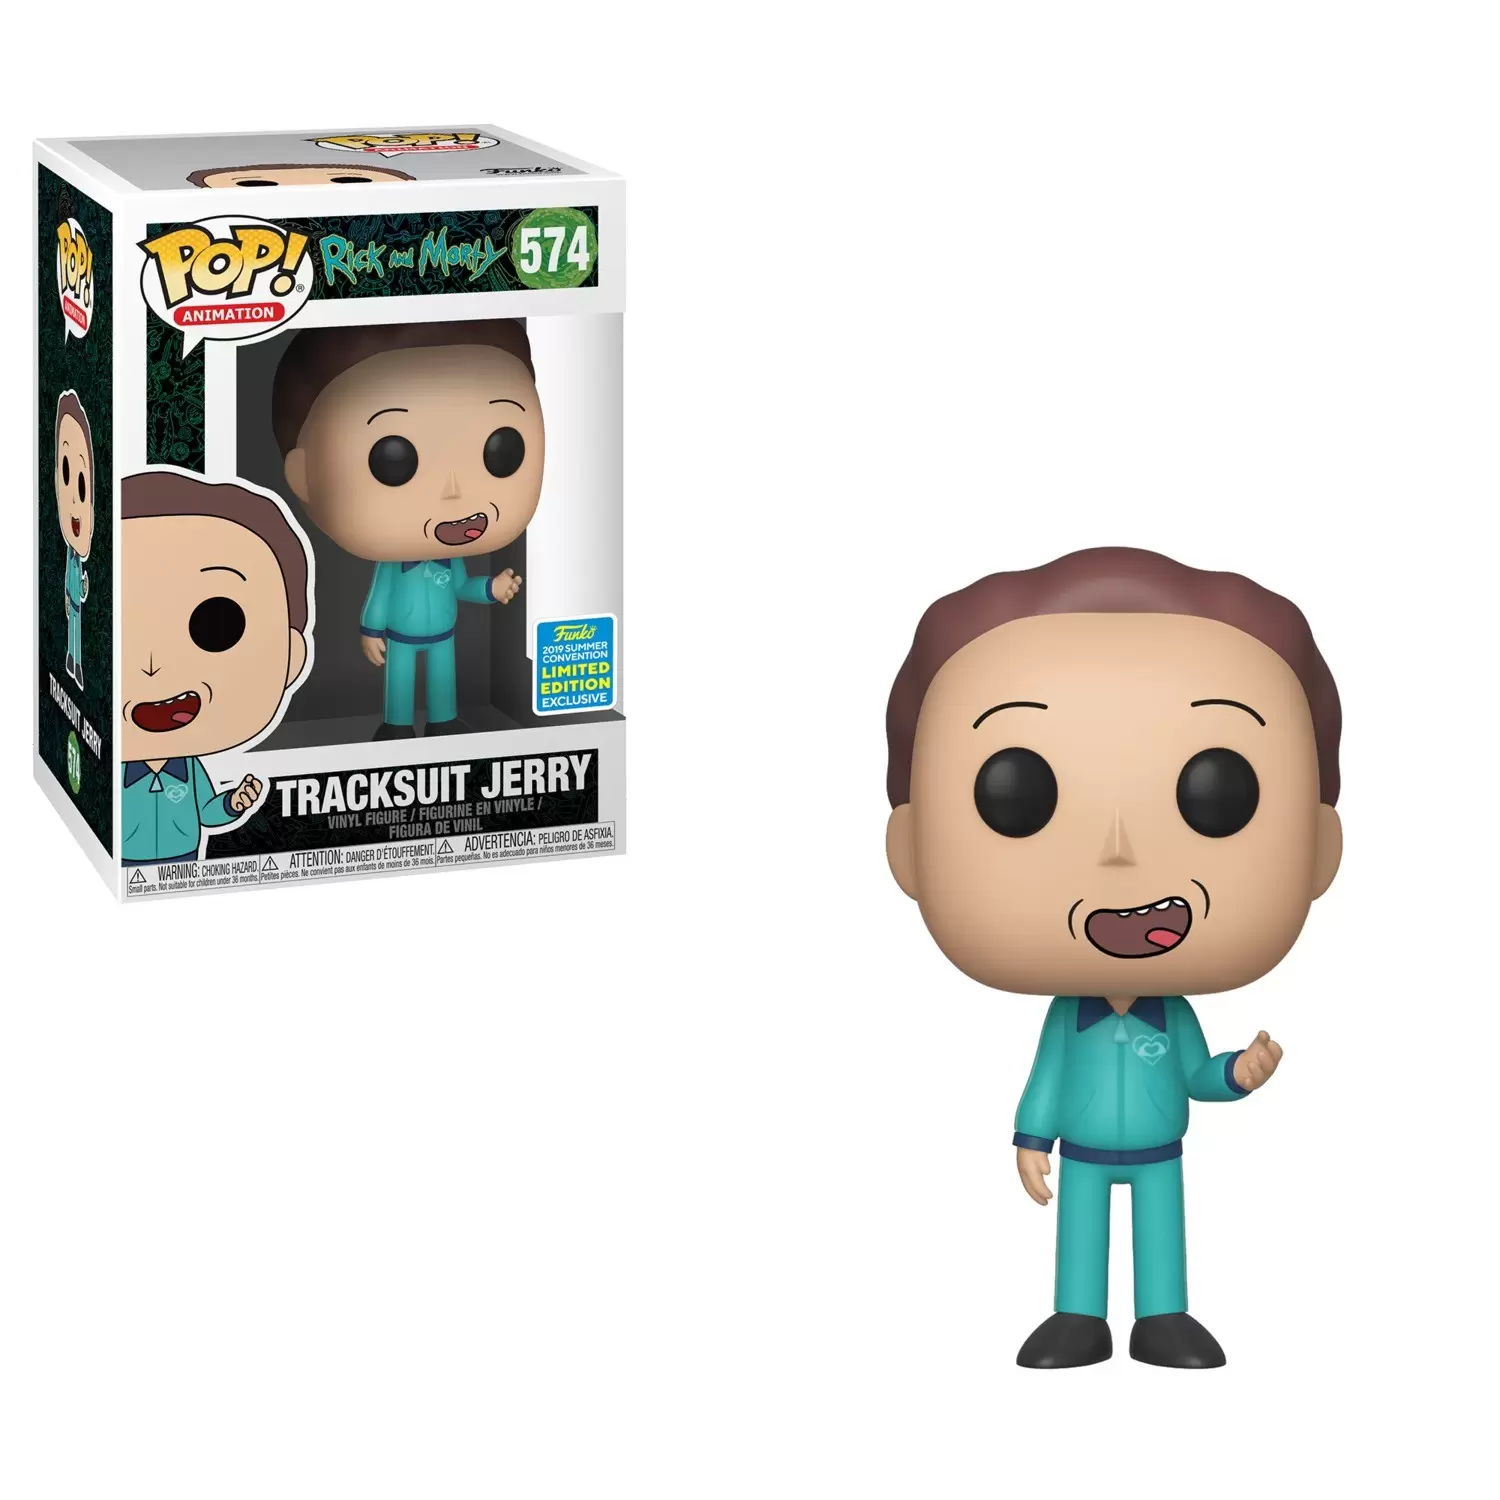 POP! Animation - Rick and Morty - Tracksuit Jerry